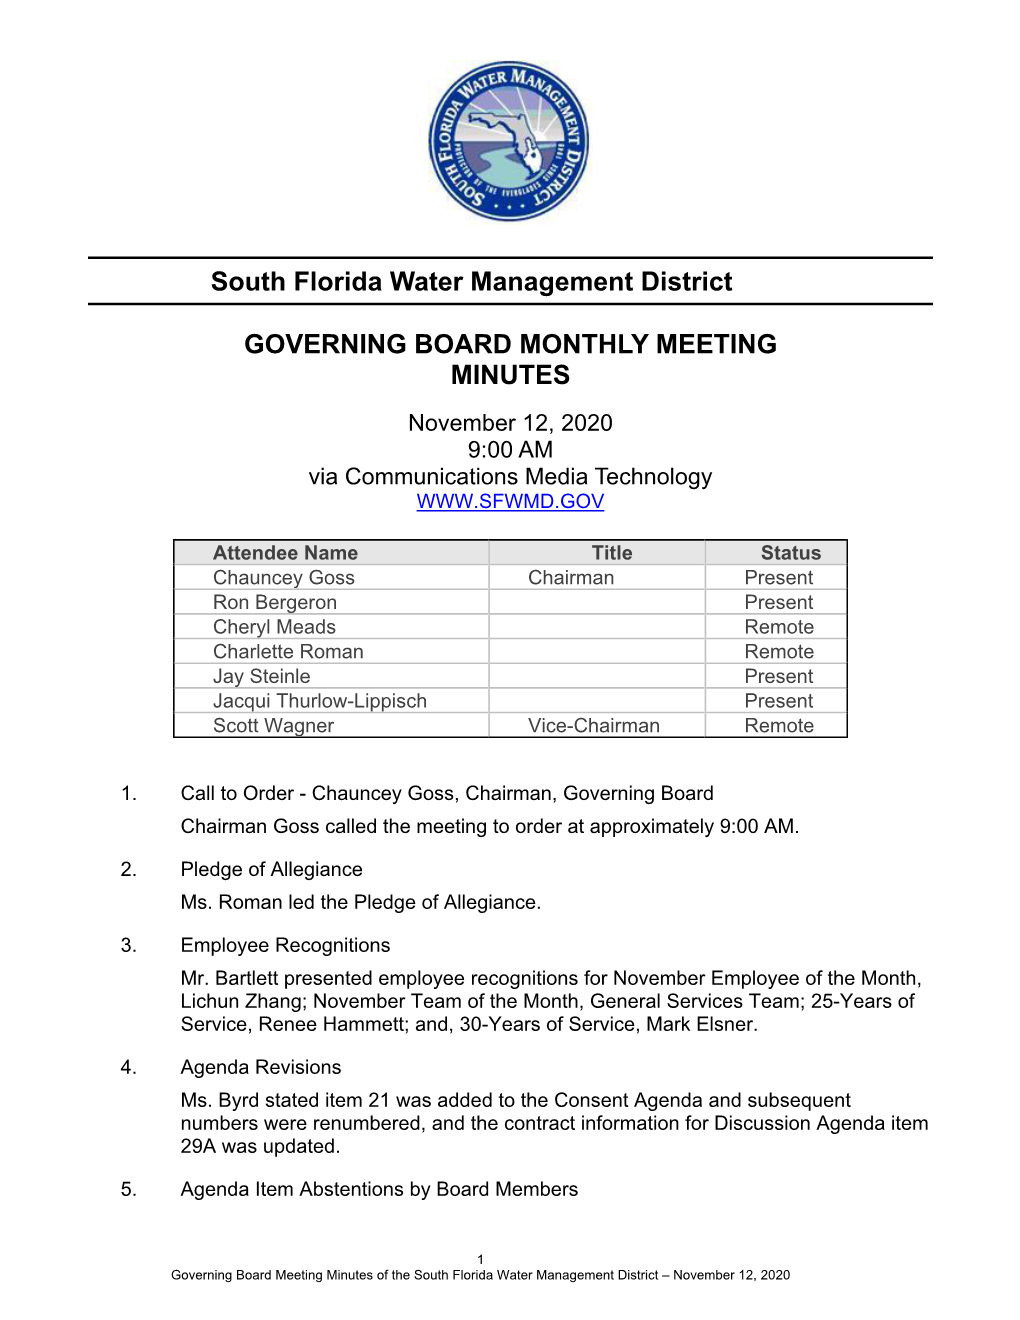 South Florida Water Management District GOVERNING BOARD